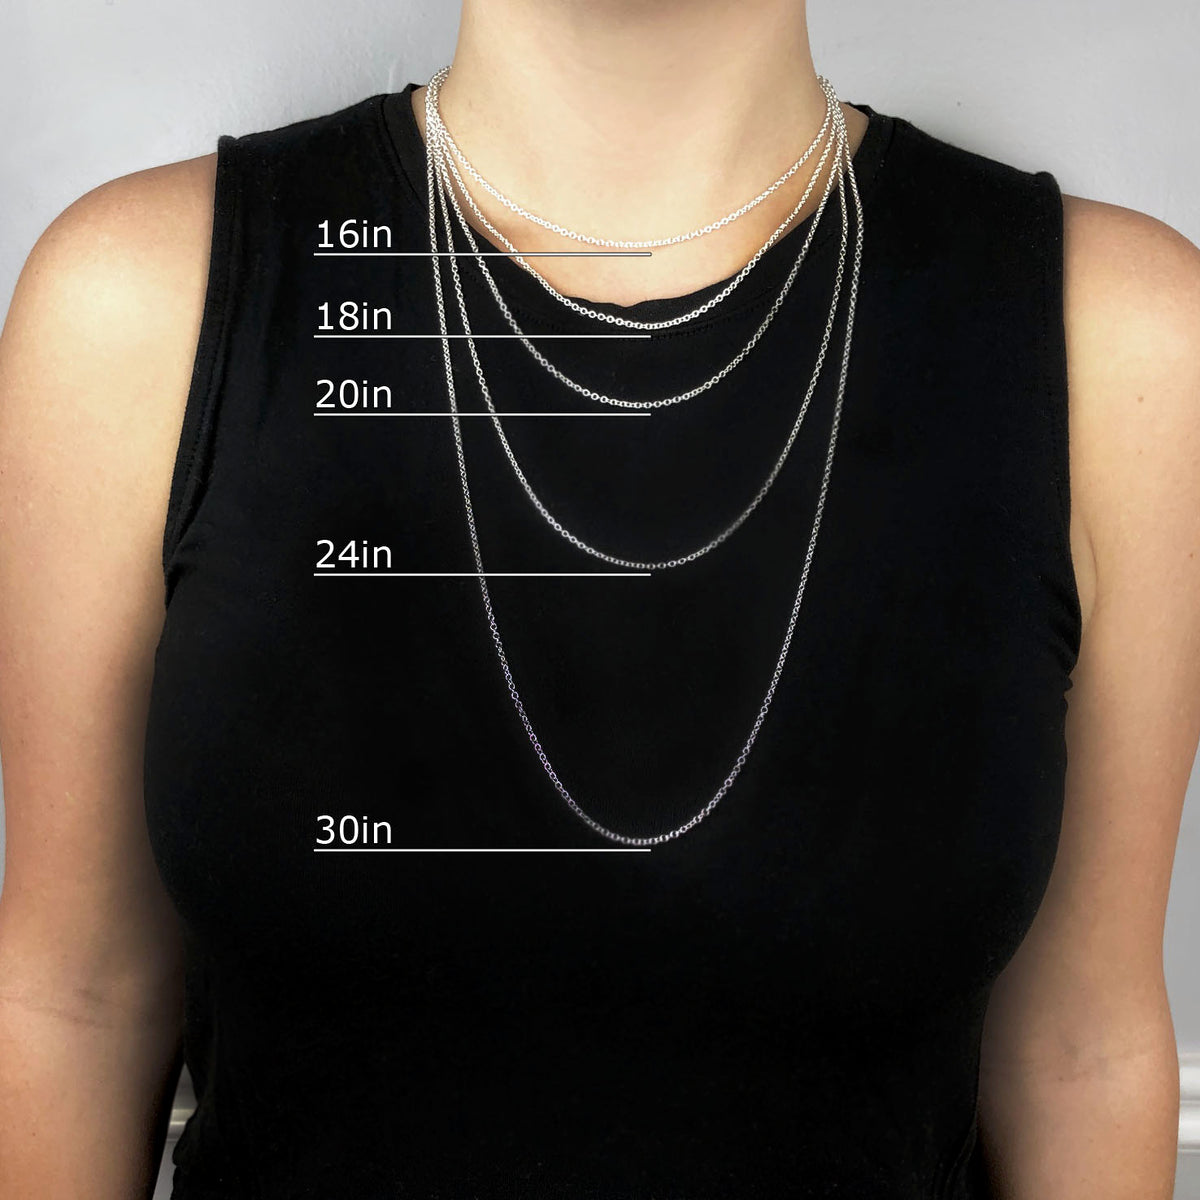 Visual Guide for Men's and Women's Chain Lengths | Mettle by Abby